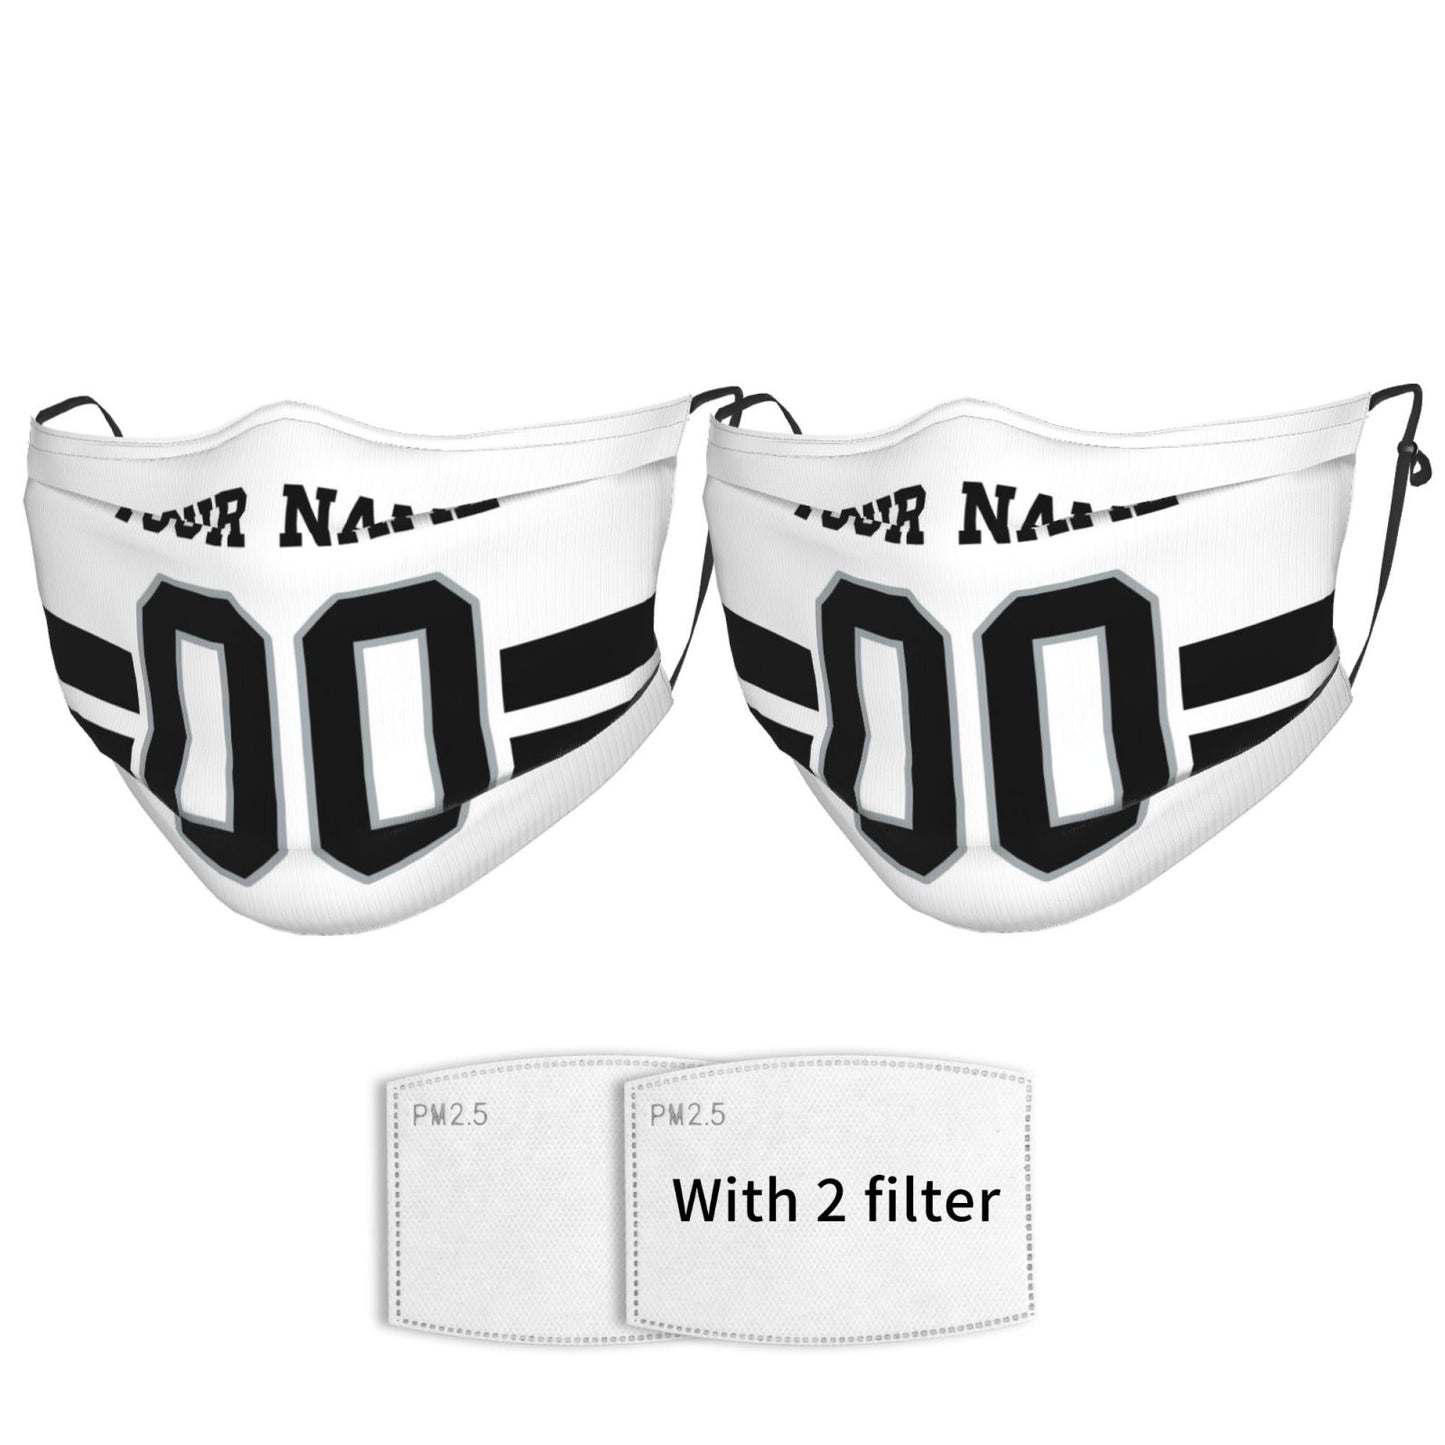 2-Pack Las Vegas Raiders Face Covering Football Team Decorative Adult Face Mask With Filters PM 2.5 White